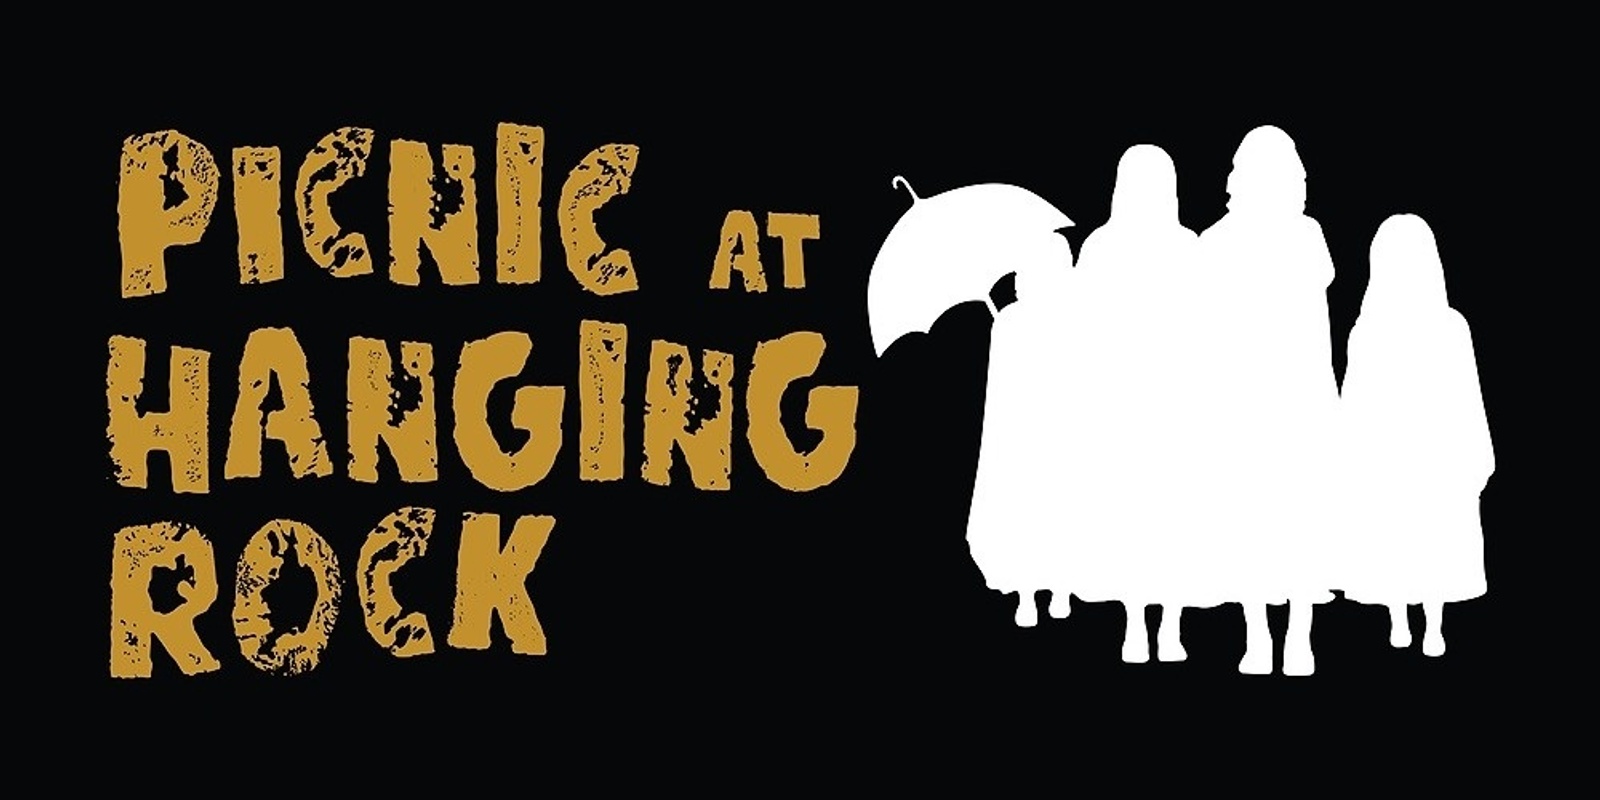 Banner image for Christian College Presents Picnic At Hanging Rock